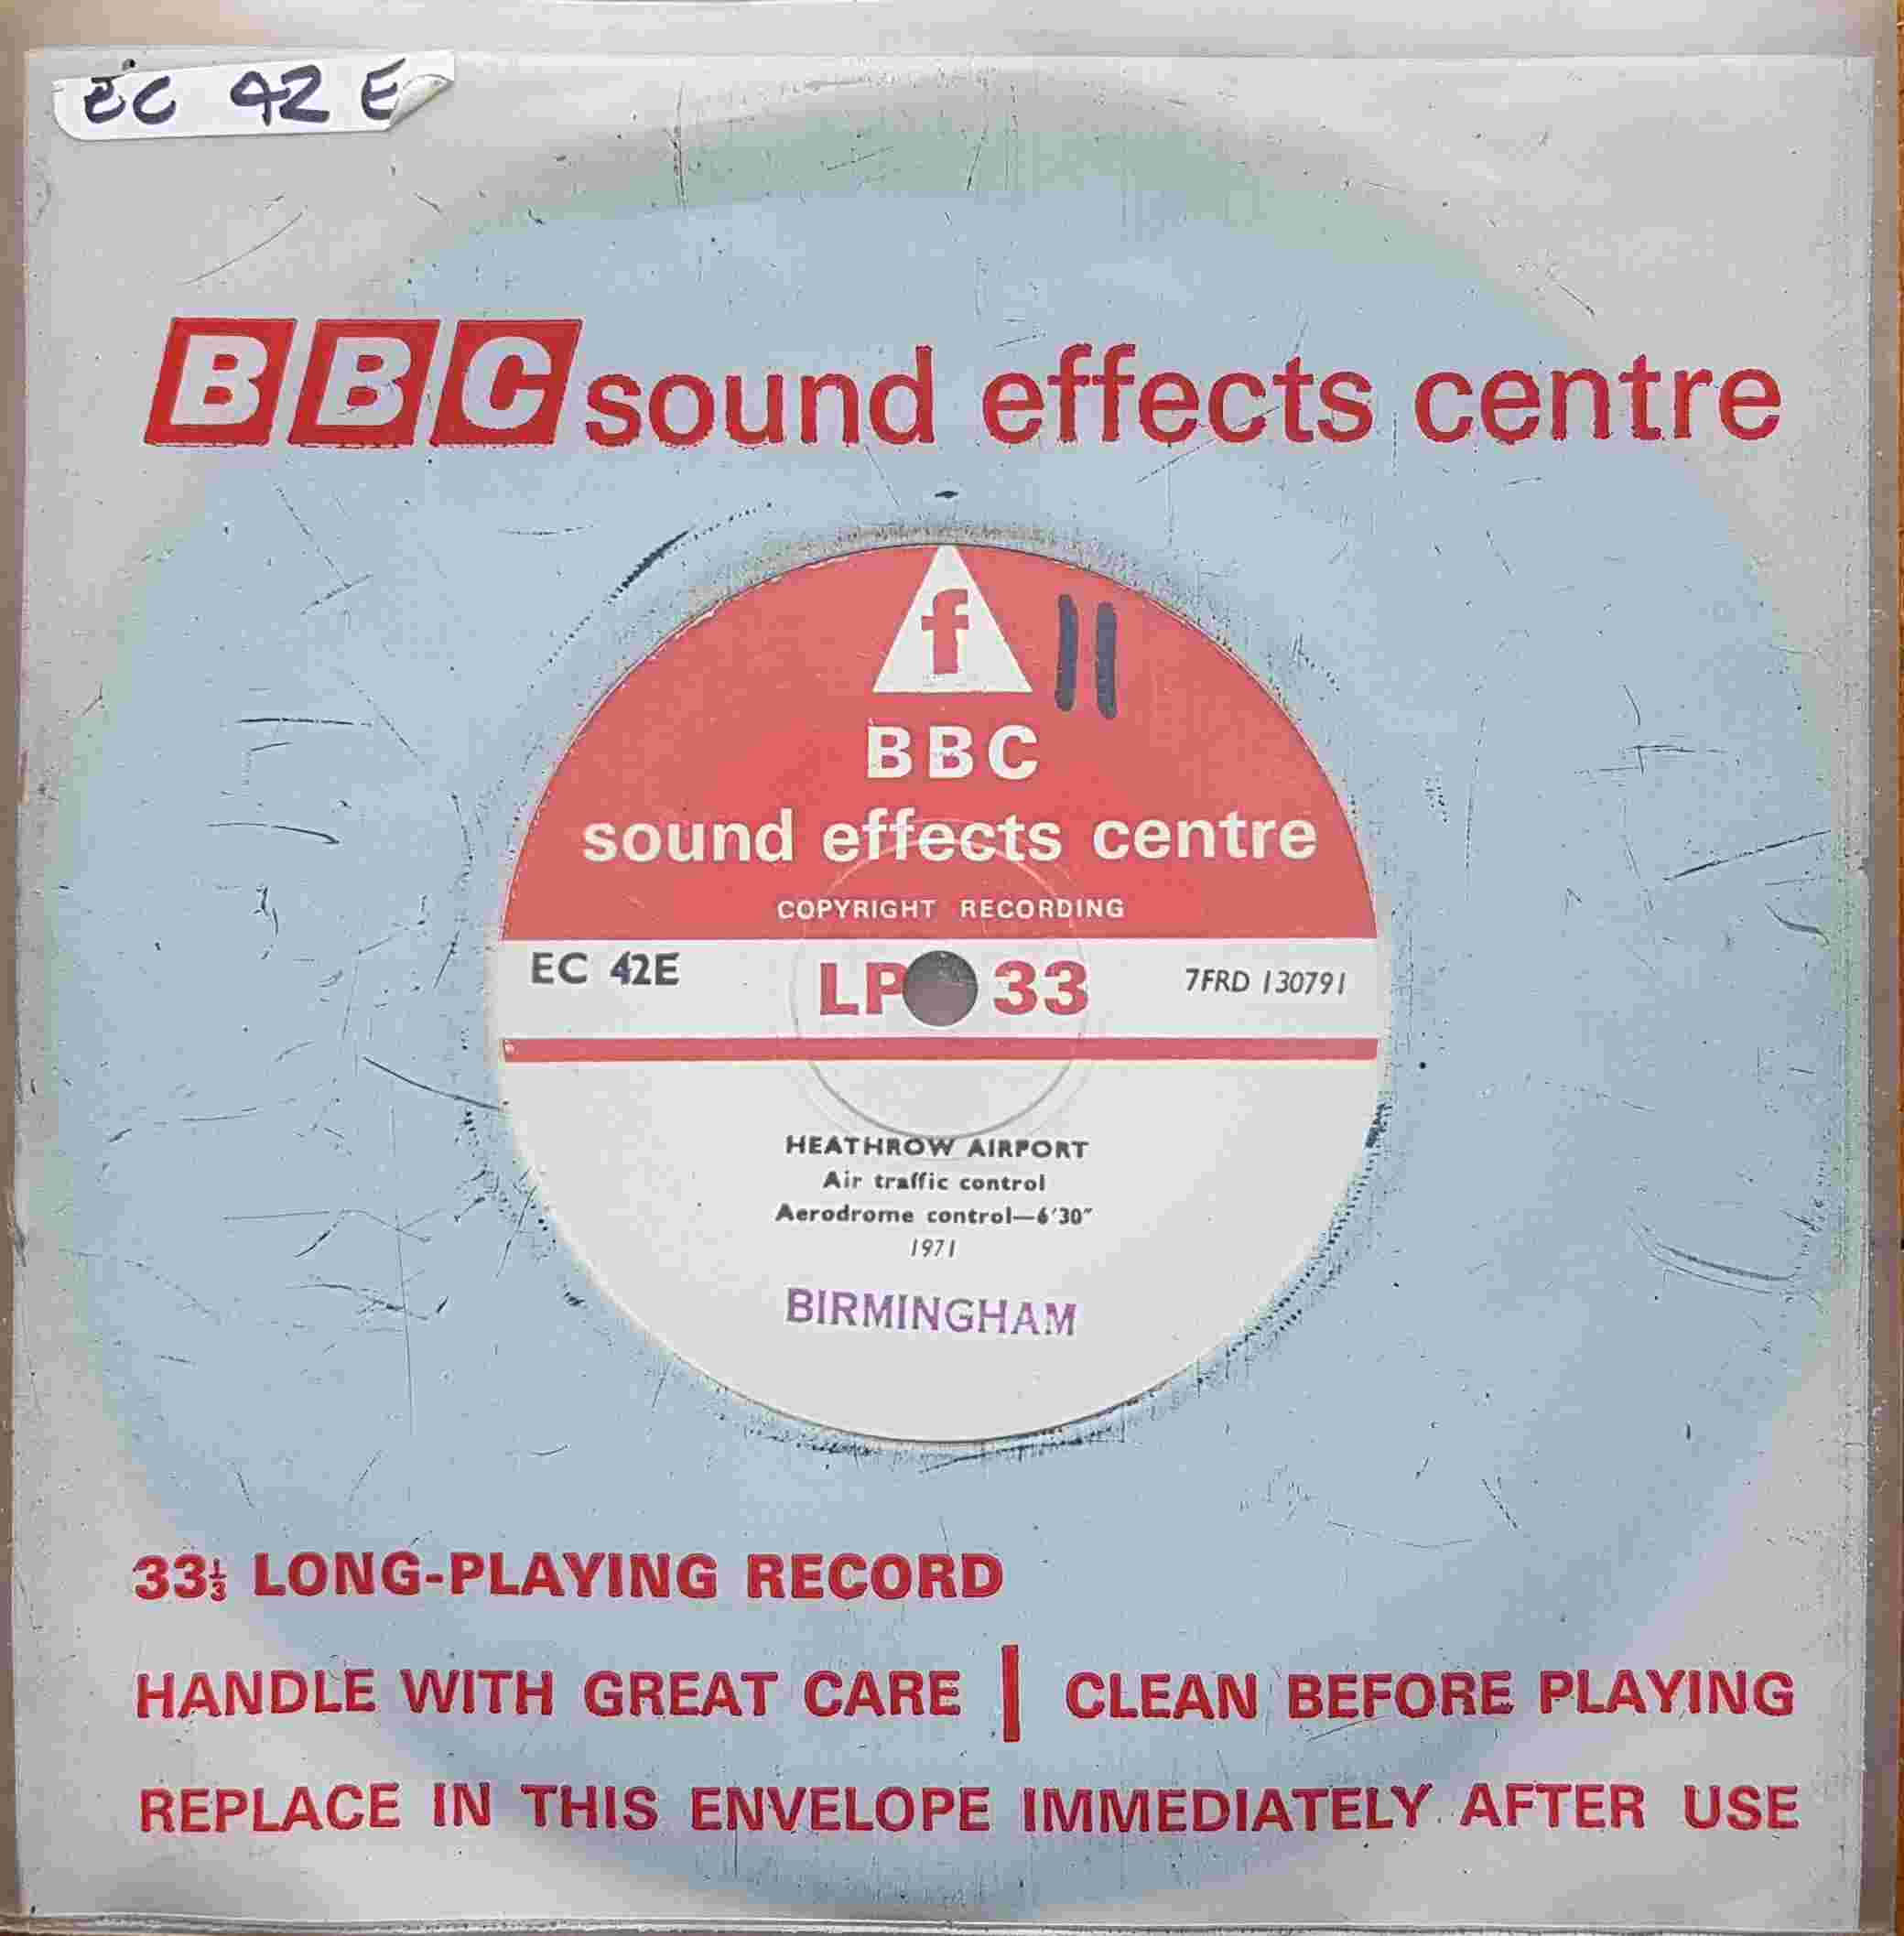 Picture of EC 42E Heathrow airport - Air traffic control 1971 by artist Not registered from the BBC records and Tapes library